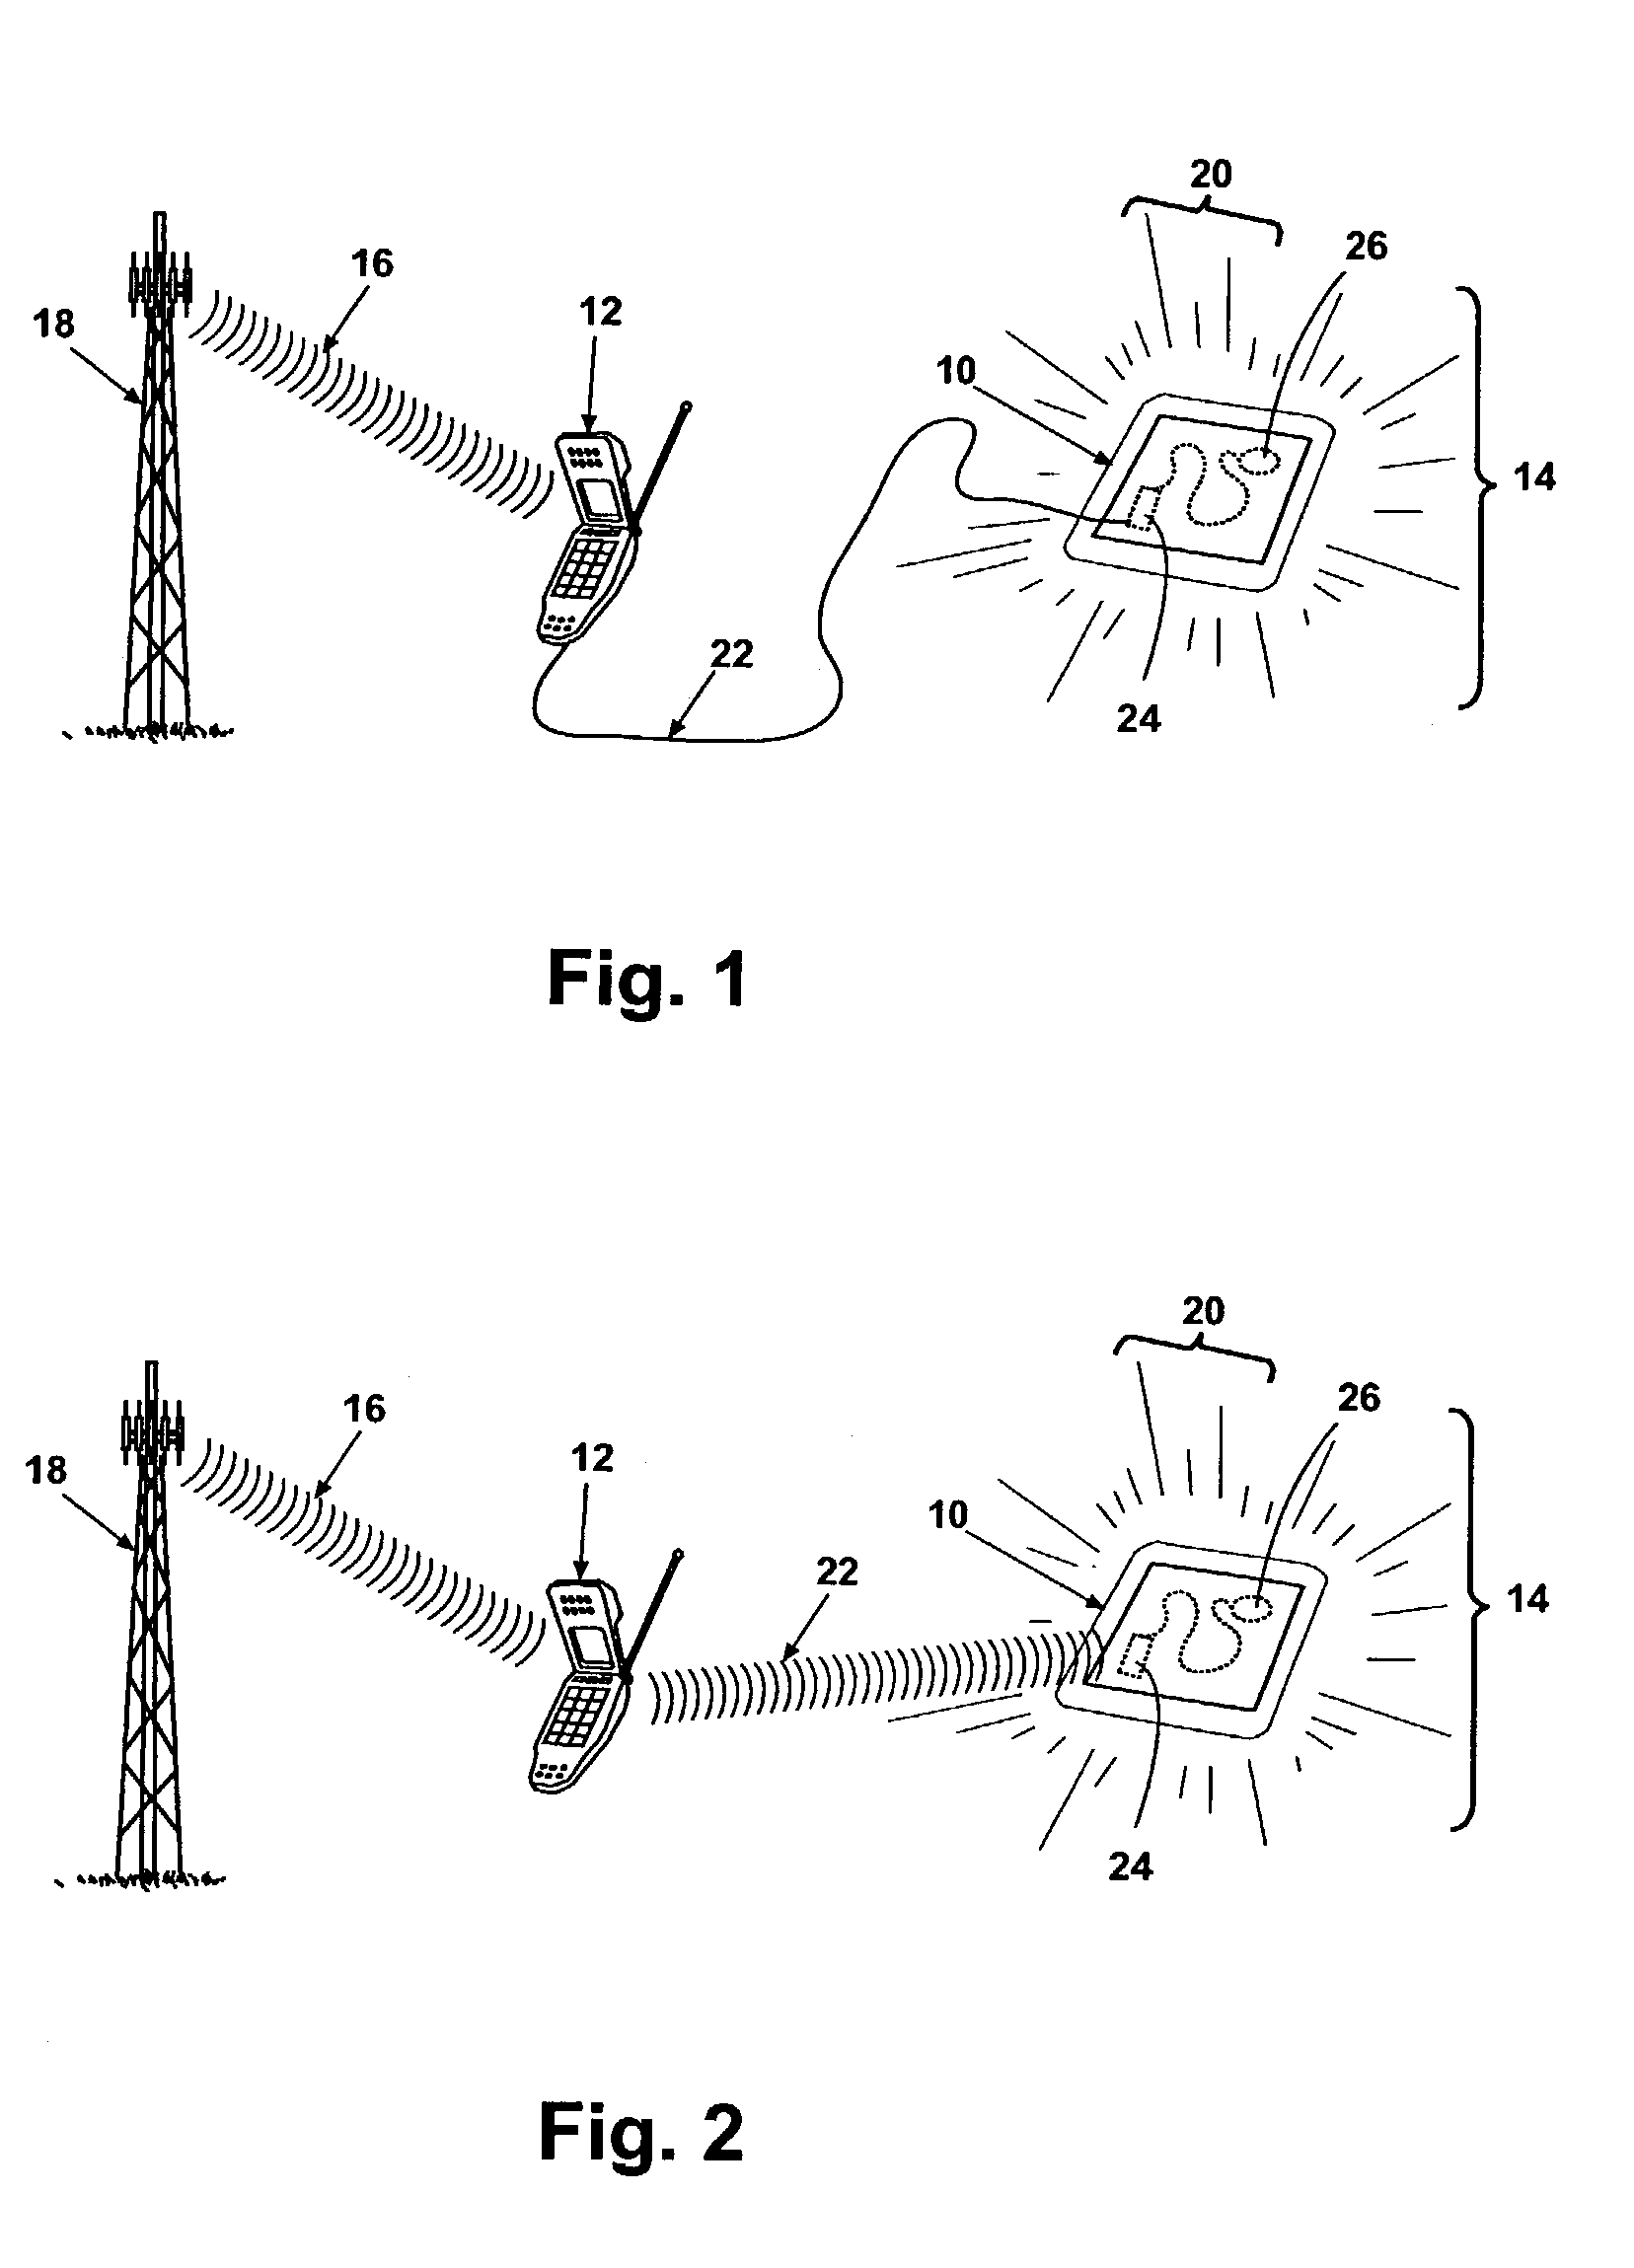 User-based signal indicator for telecommunications device and method of remotely notifying a user of an incoming communications signal incorporating the same